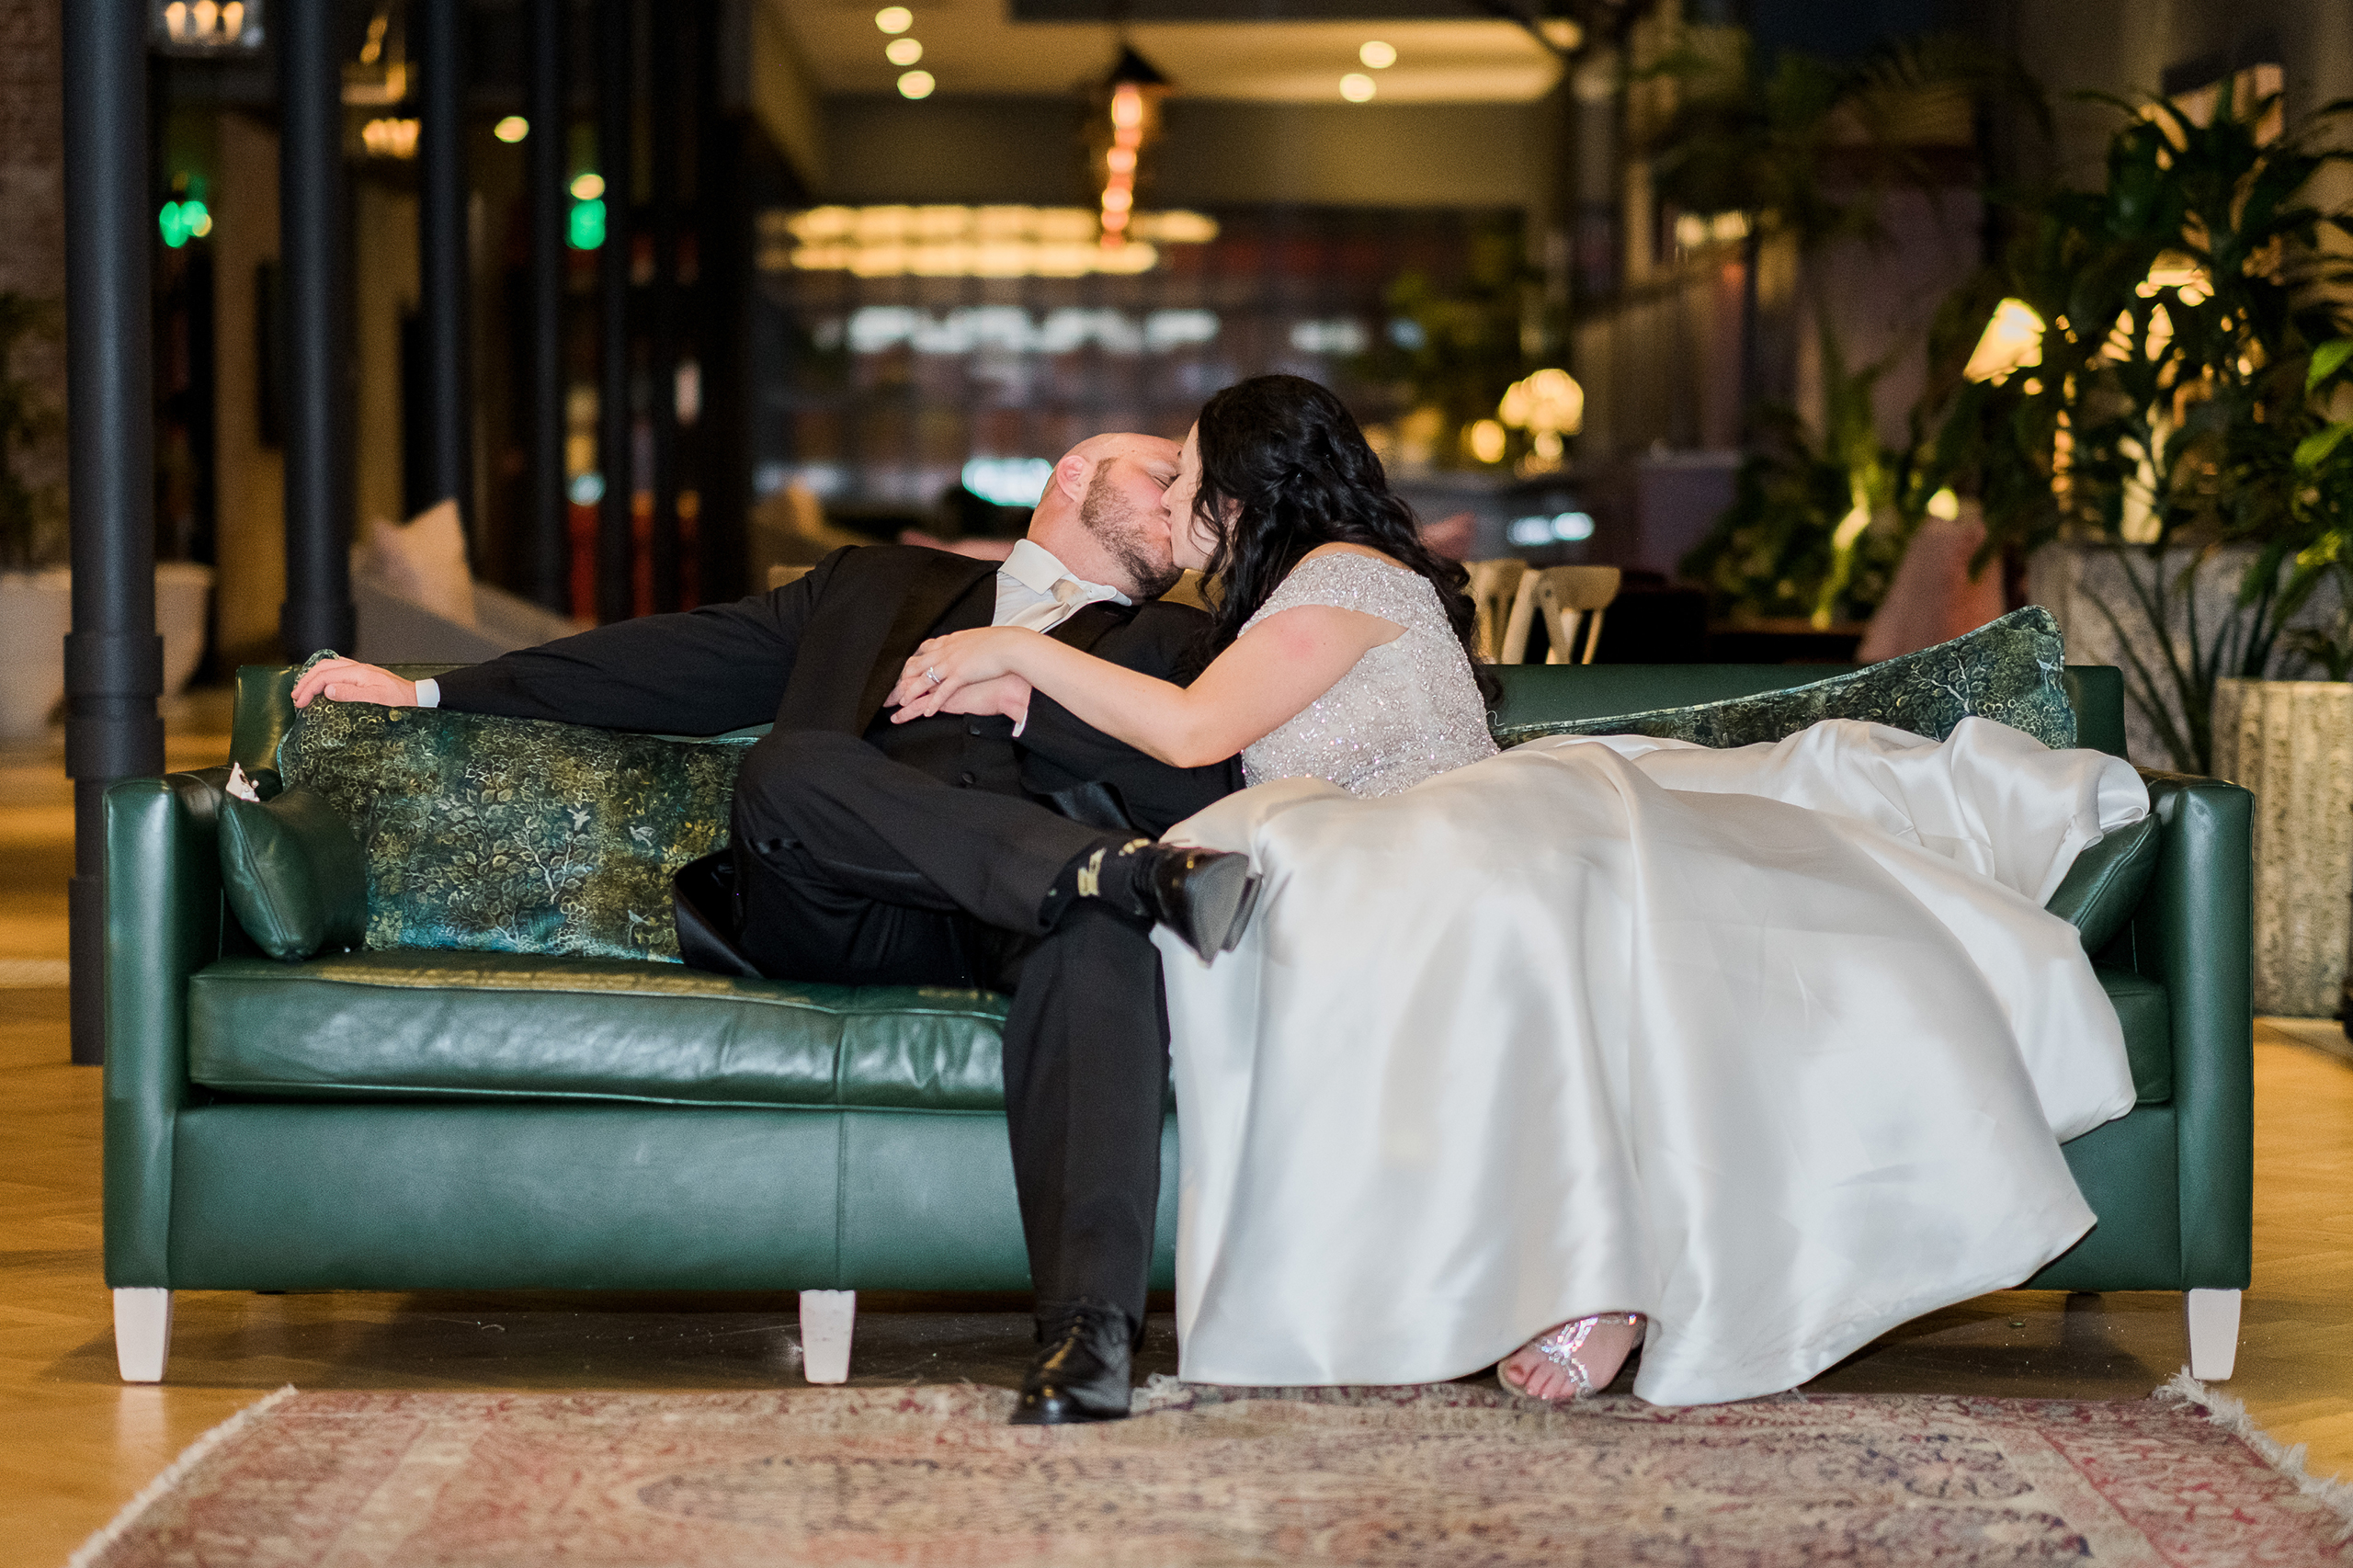 A bride and groom sharing a kiss at The Eliza Jane hotel in New Orleans